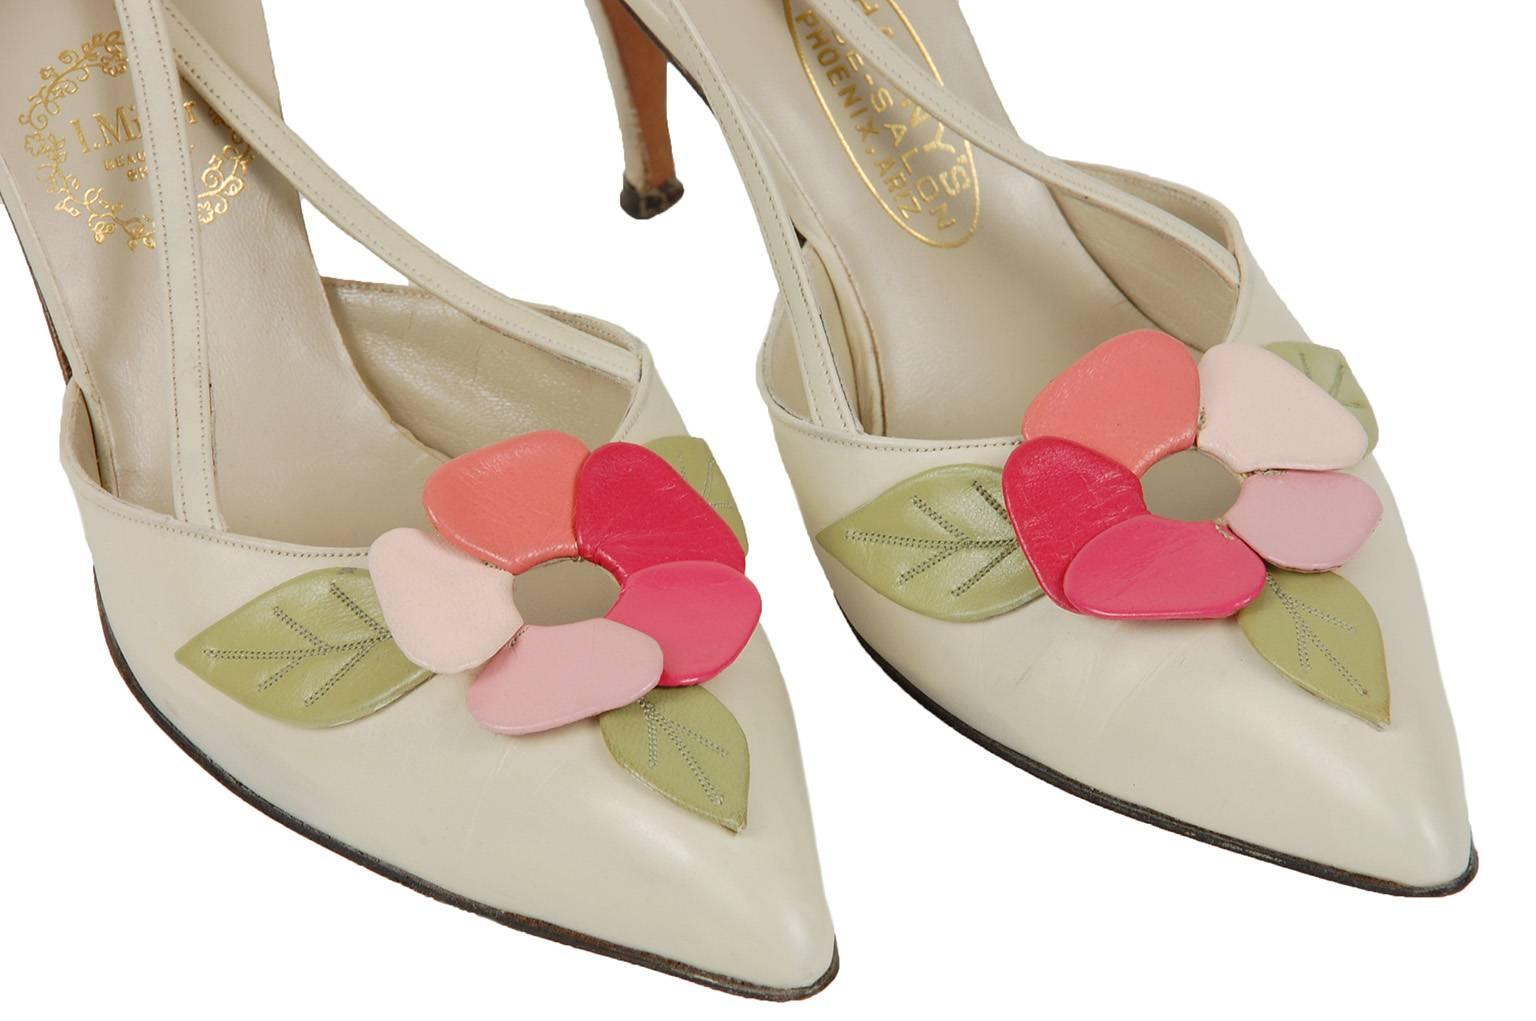 A Miller Ivory, Pink and Green Peony Vamp Slingback Stiletto Sandals-6.5A, 1950s Pour femmes en vente